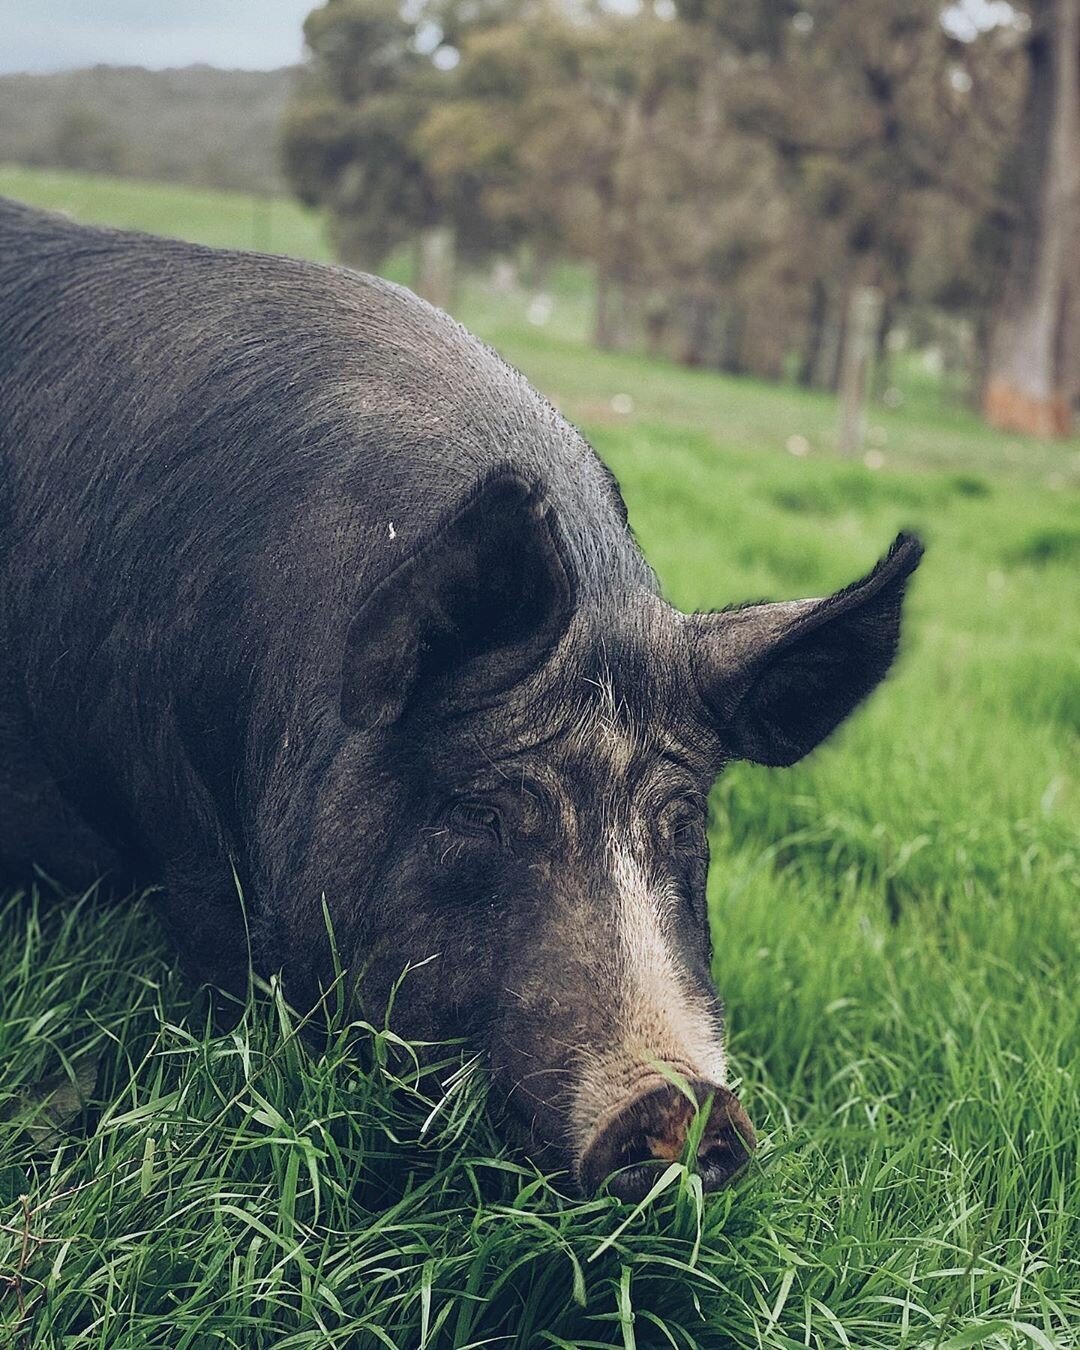 Oh hi Helga! @allingtonfamilyfarms tagged is this photo of a gorgeous gal and we had to share.

If you're lucky enough to be in WA, you can find their stall of fresh local produce at the @mtclaremontfarmersmarket every week! Which leads us to ask: wh